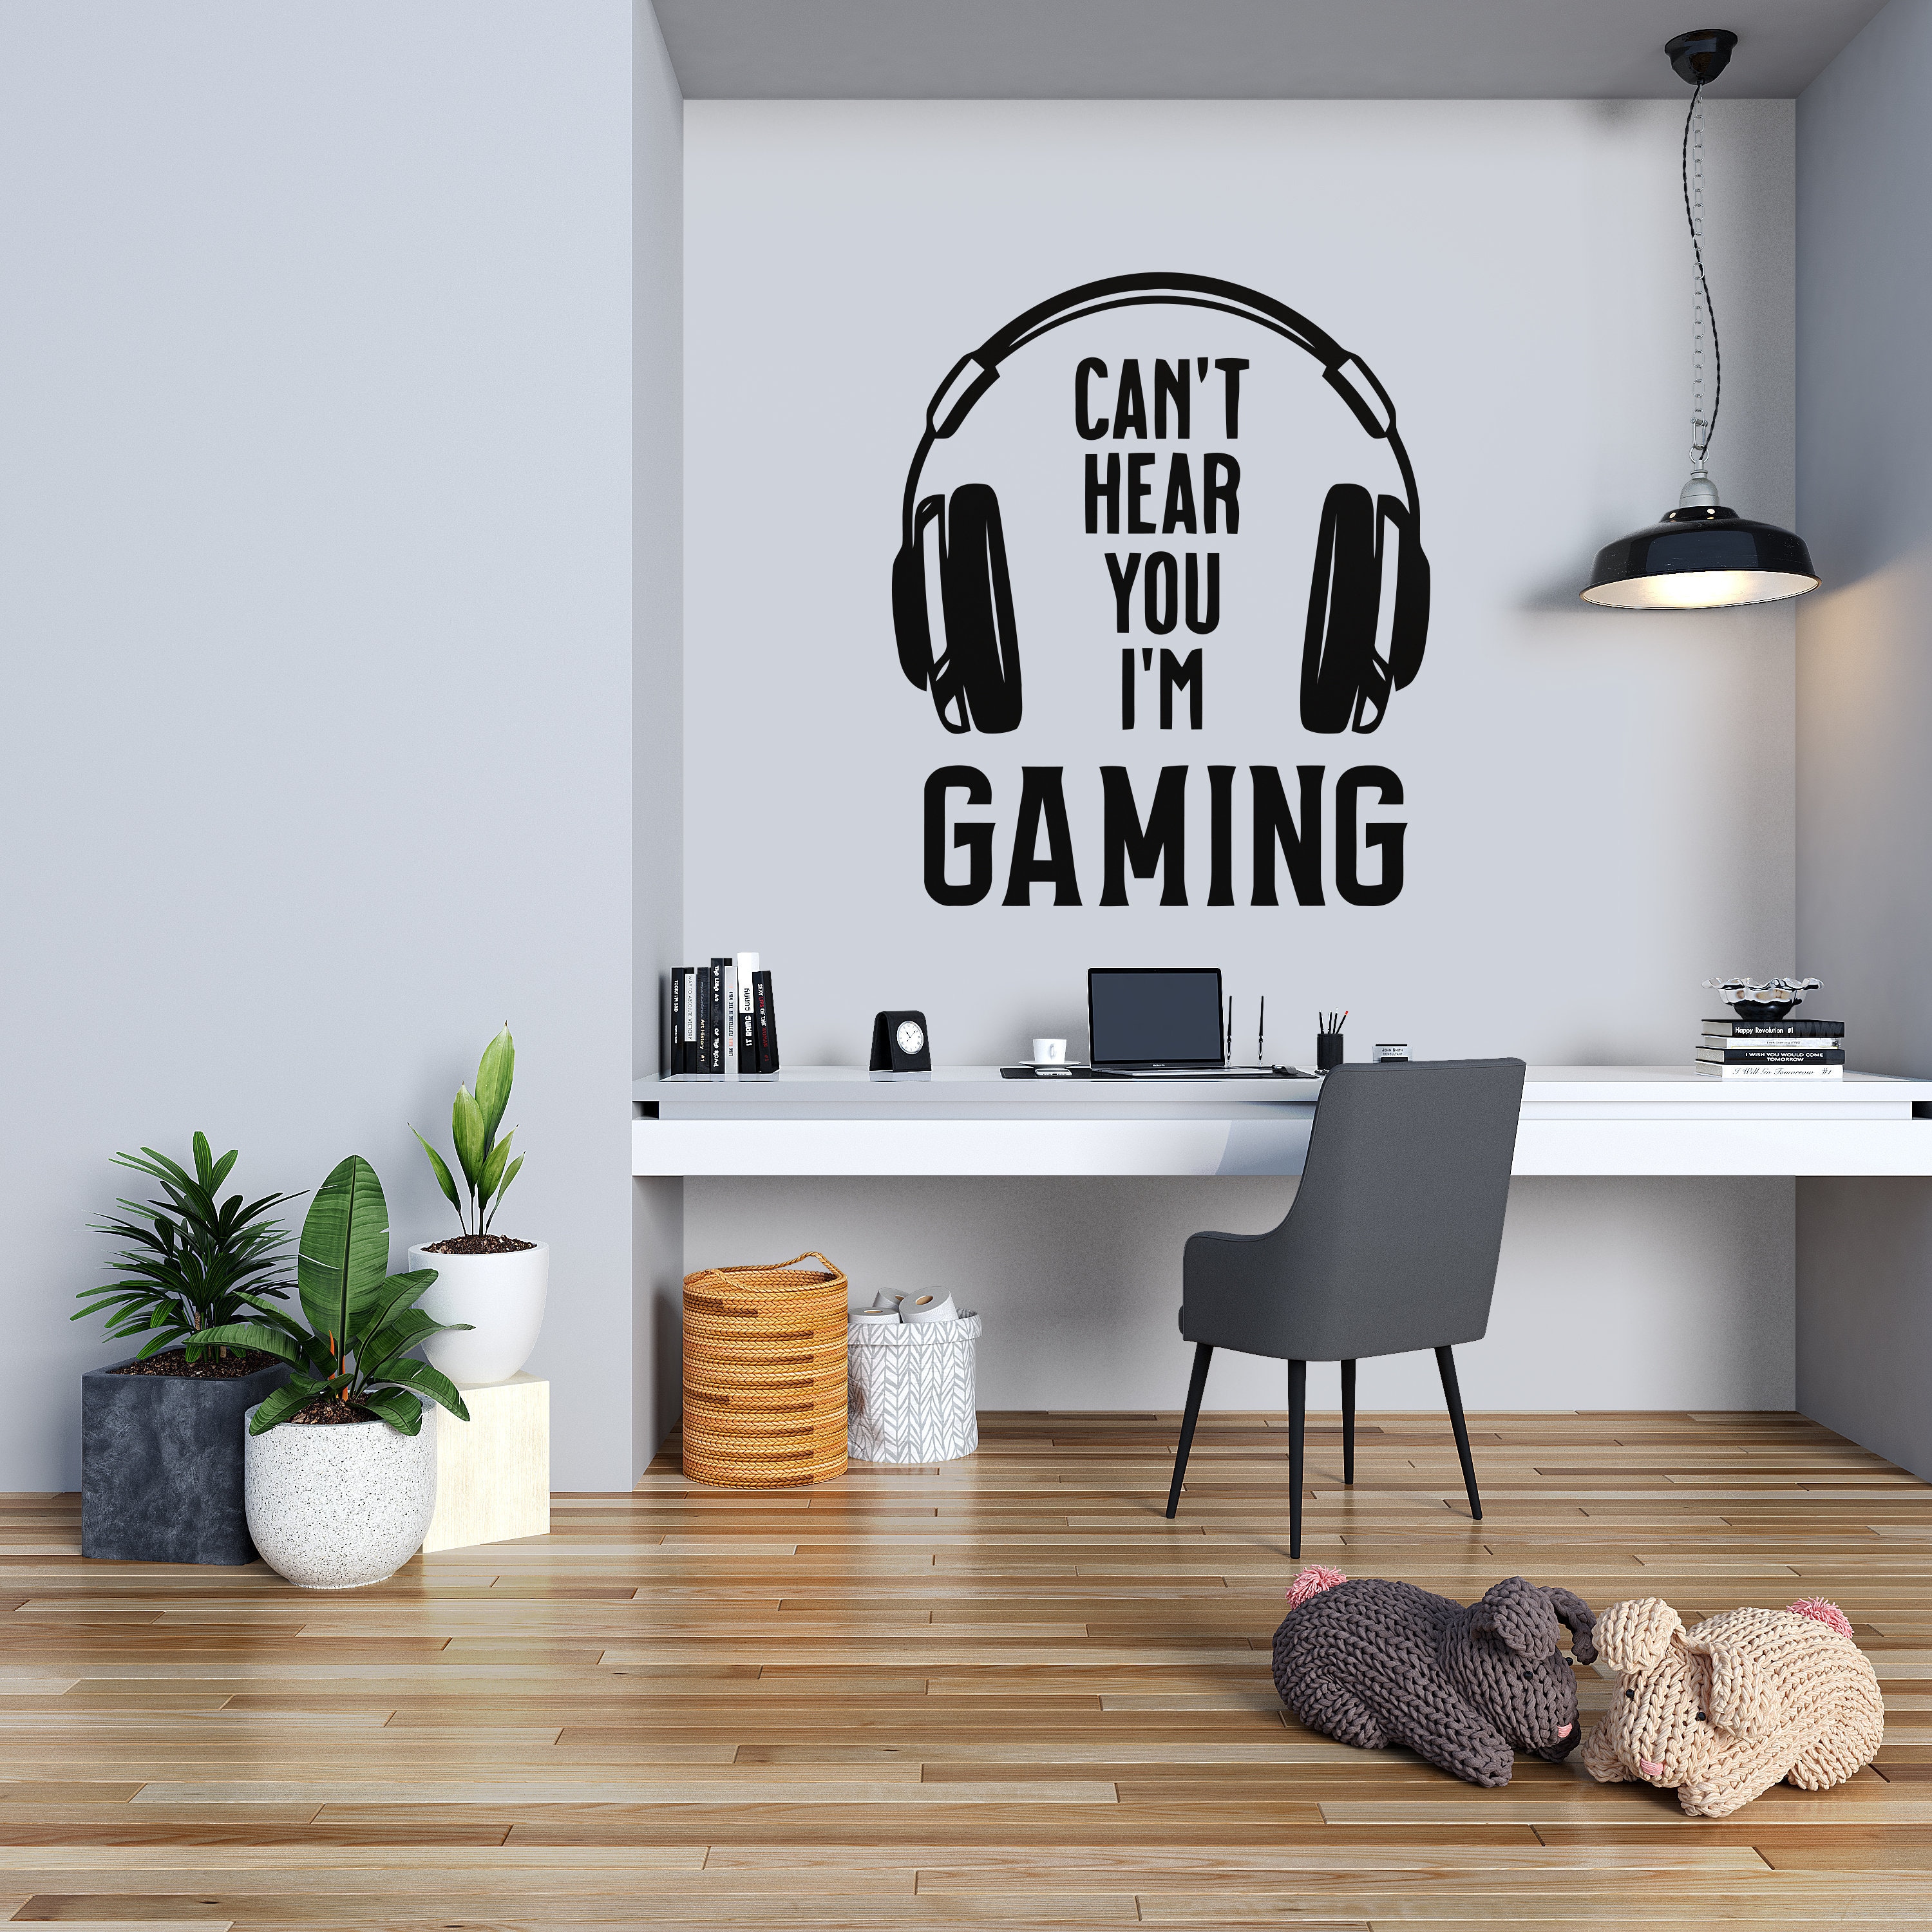 Gamer Wall Decor Custom Controller Decal Video Game Girl Boy Room Gifts Him  Bedroom Gamer Dad Life Vinyl Wall Art Decals Kids Stickers 280ER 